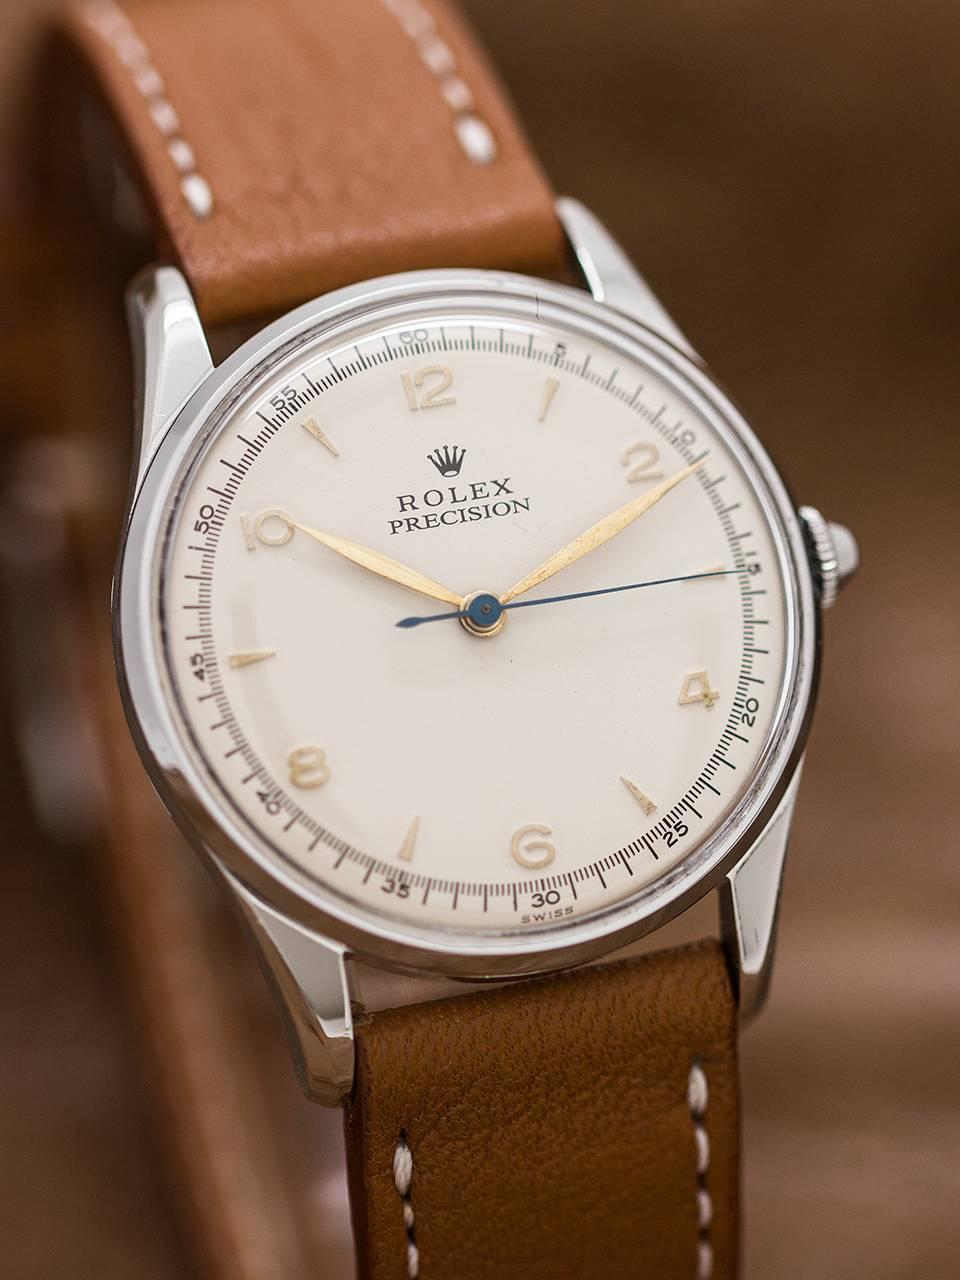 Rolex Stainless Steel manual wind dress model ref 5517 circa 1950’s. Featuring a 32 mm diameter snap back case with acrylic crystal and older antique white restored dial with raised gold numbers and indexes. With beautiful gold leaf hands, and a